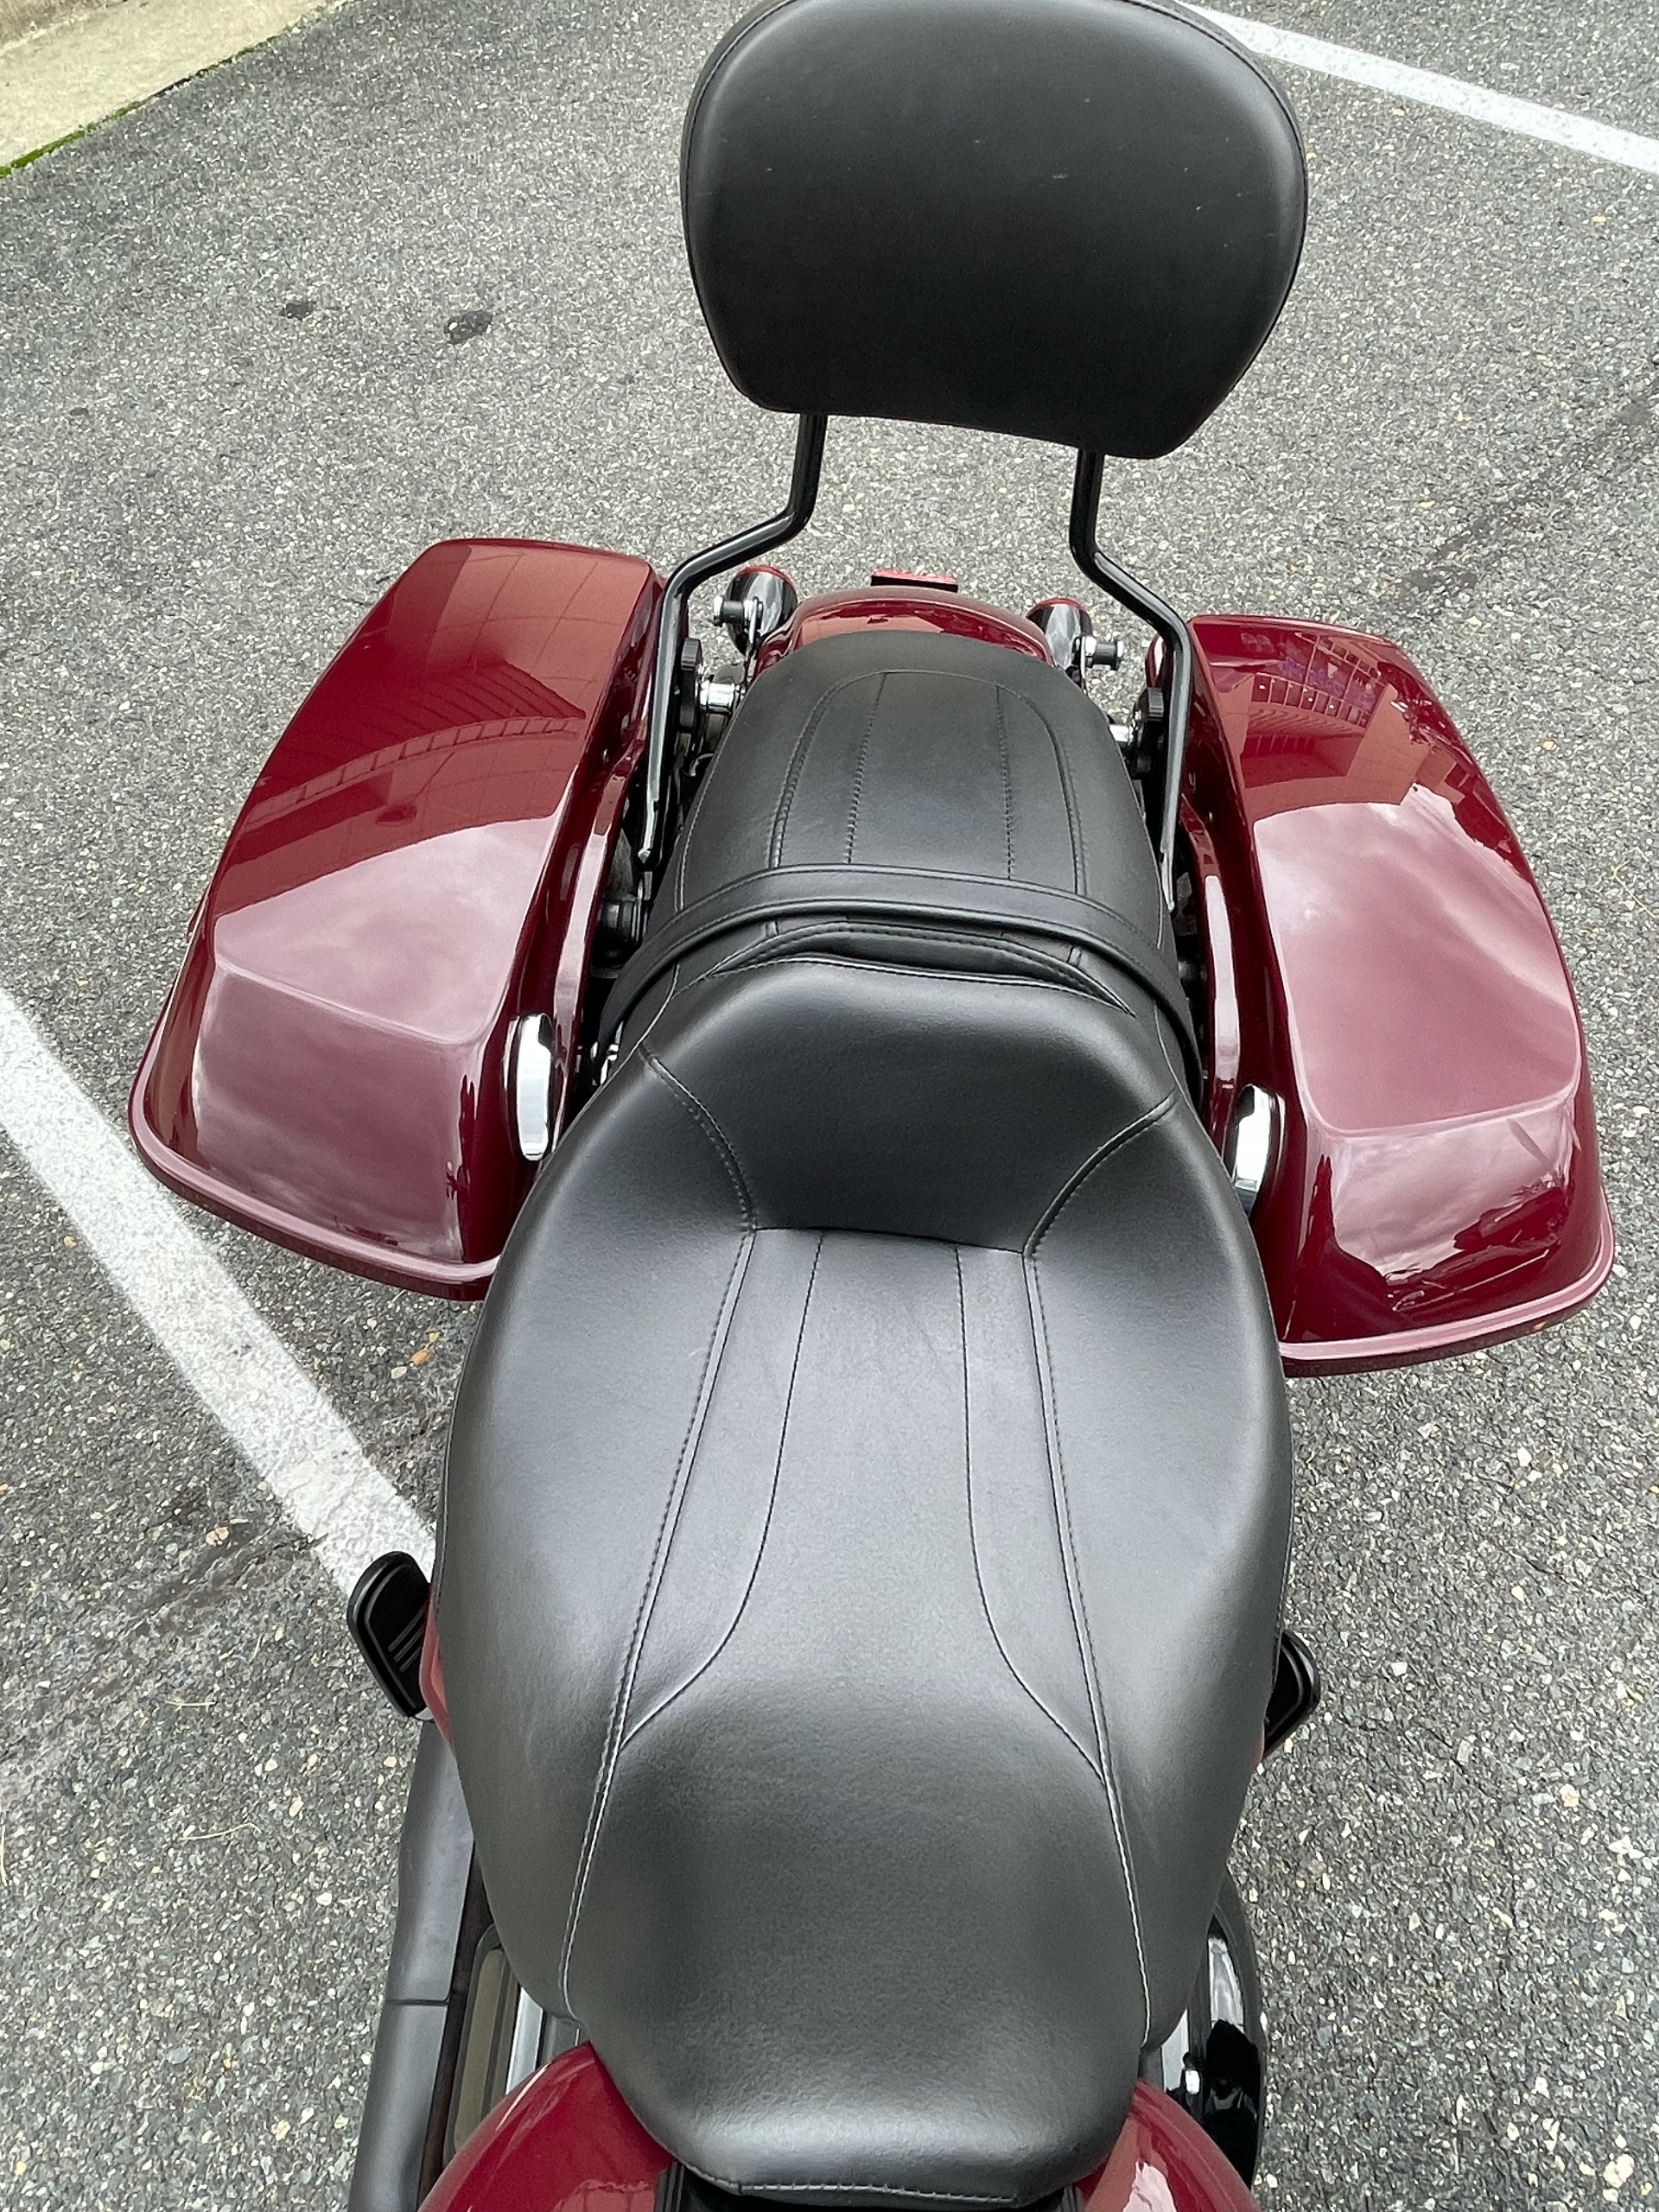 2020 Harley-Davidson Road King® Special in Dumfries, Virginia - Photo 12